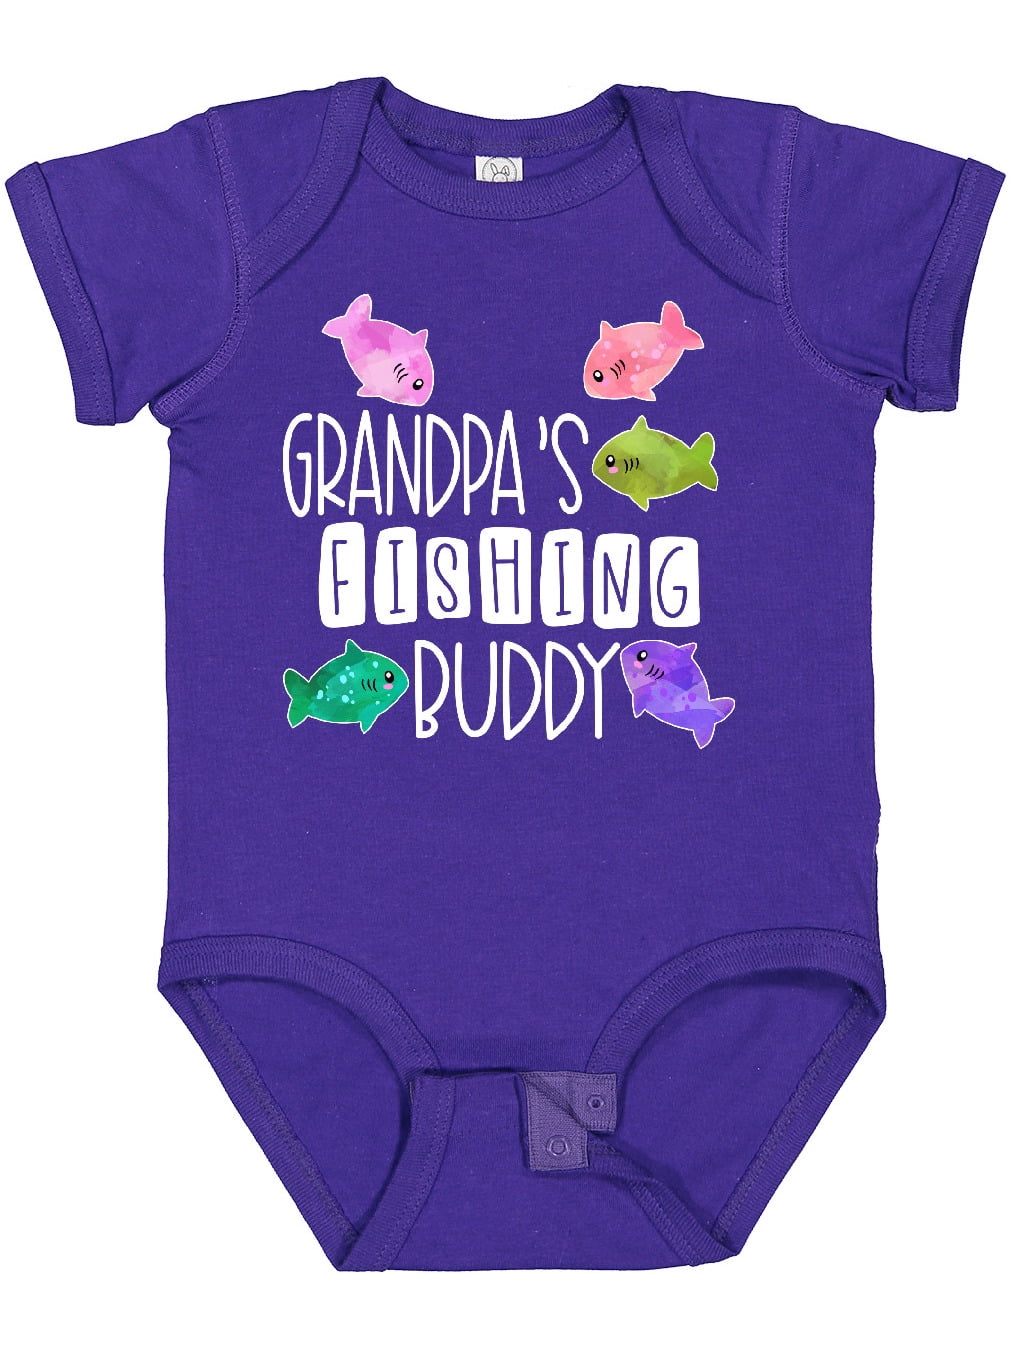 Inktastic Grandpa's Fishing Buddy with Colorful Fish Boys or Girls Baby  Bodysuit 